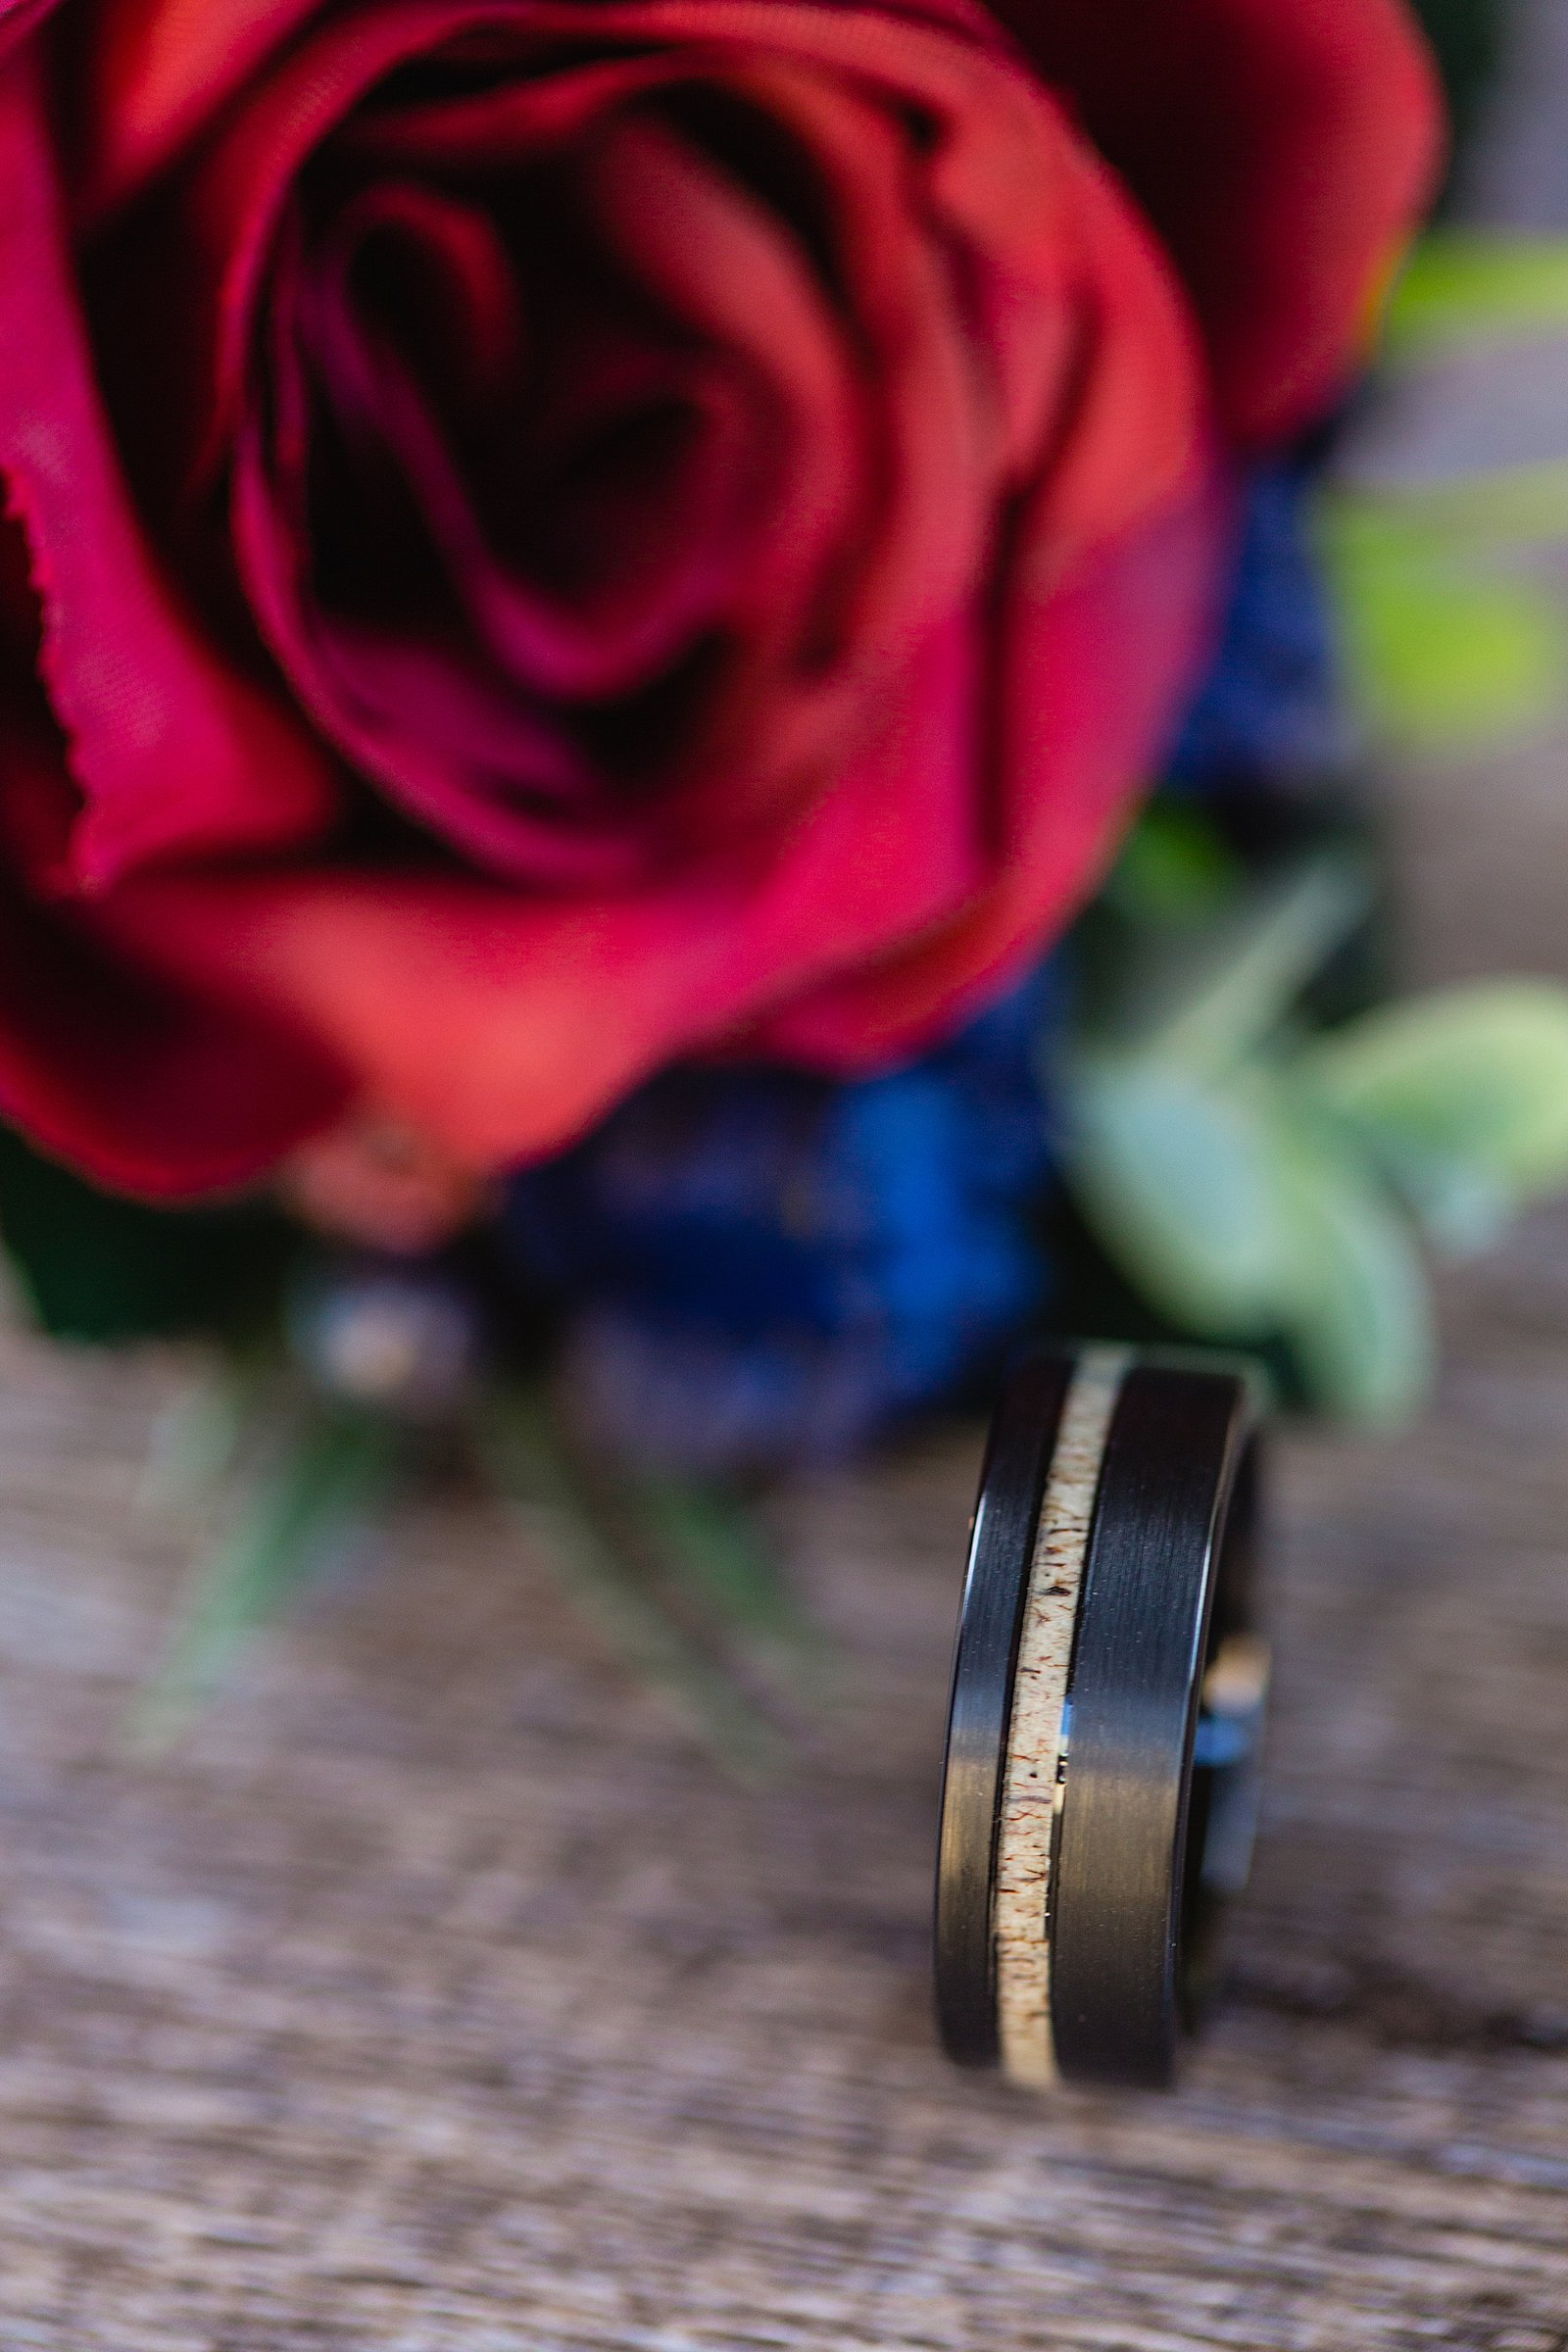 Groom's wedding day details of custom wedding ring and boutonniere by PMA Photography.